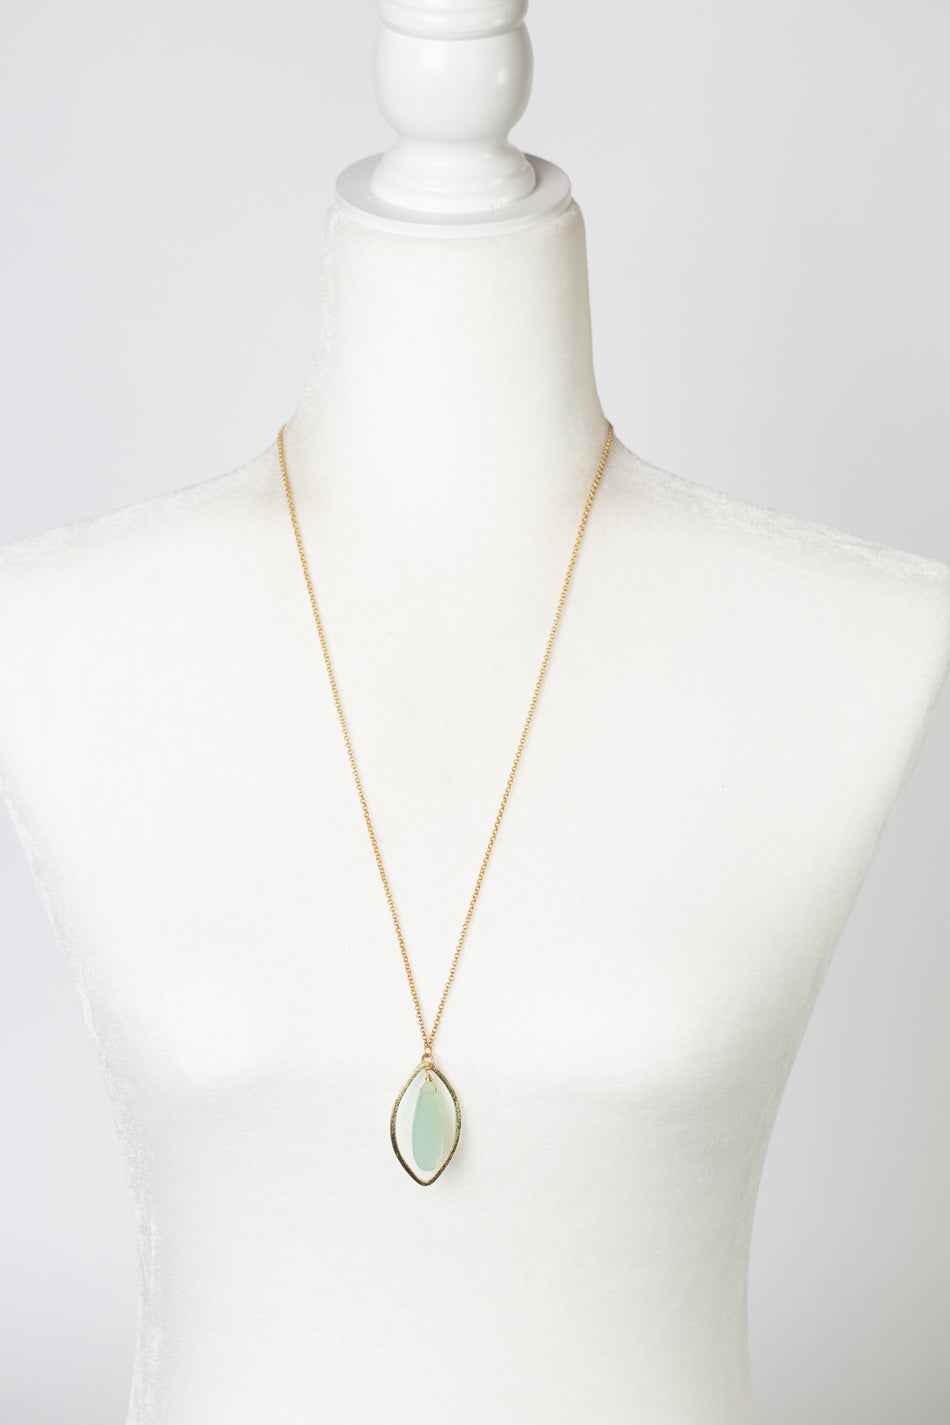 Limited Edition 25-27" Faceted Chalcedony Drop Pendant With Brushed Gold Oval Simple Necklace